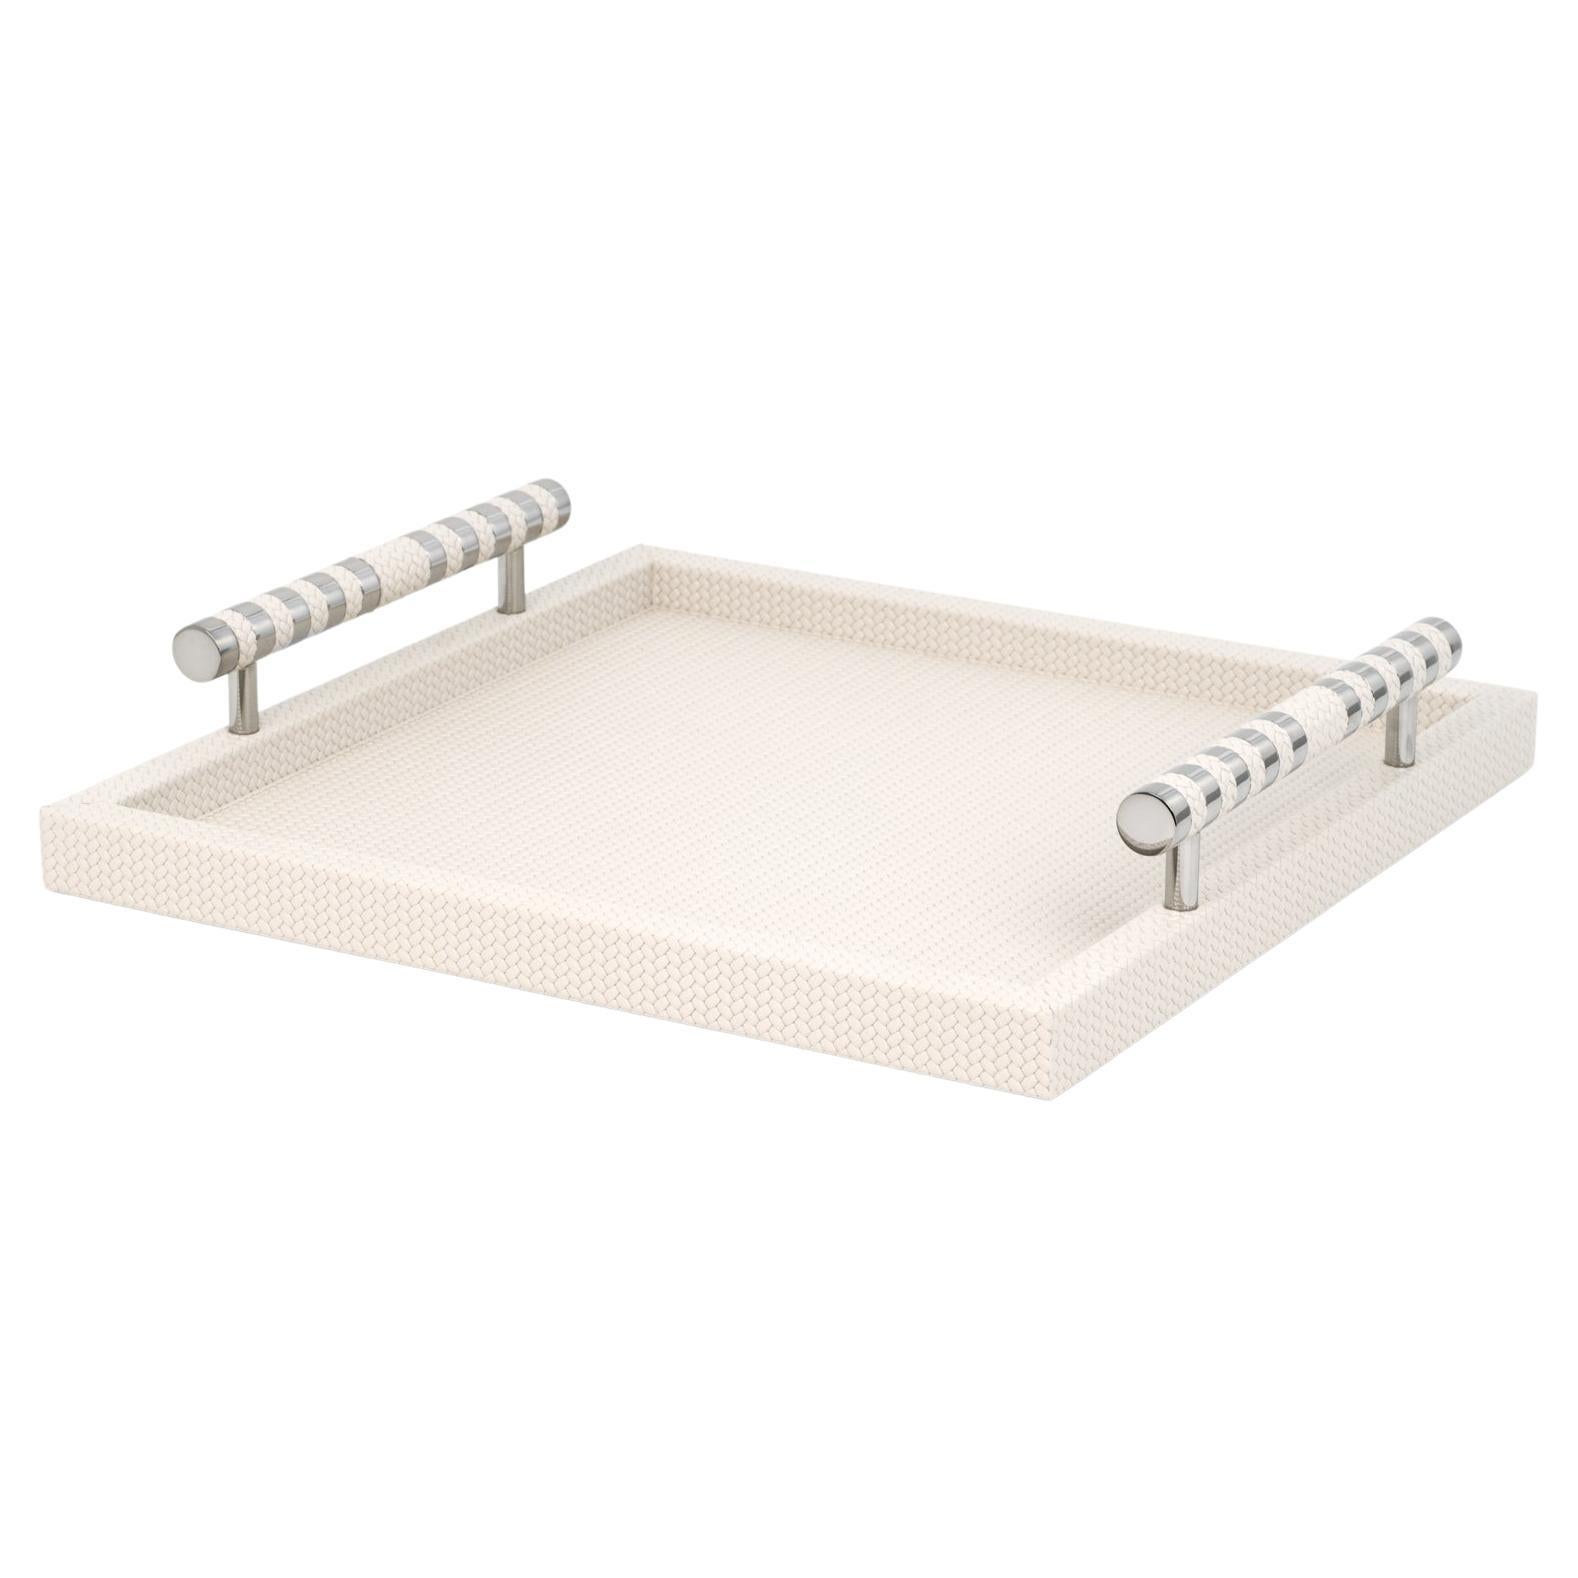 21st Century Saturno Serving Leather Tray with Chrome Handles Handmade in Italy For Sale